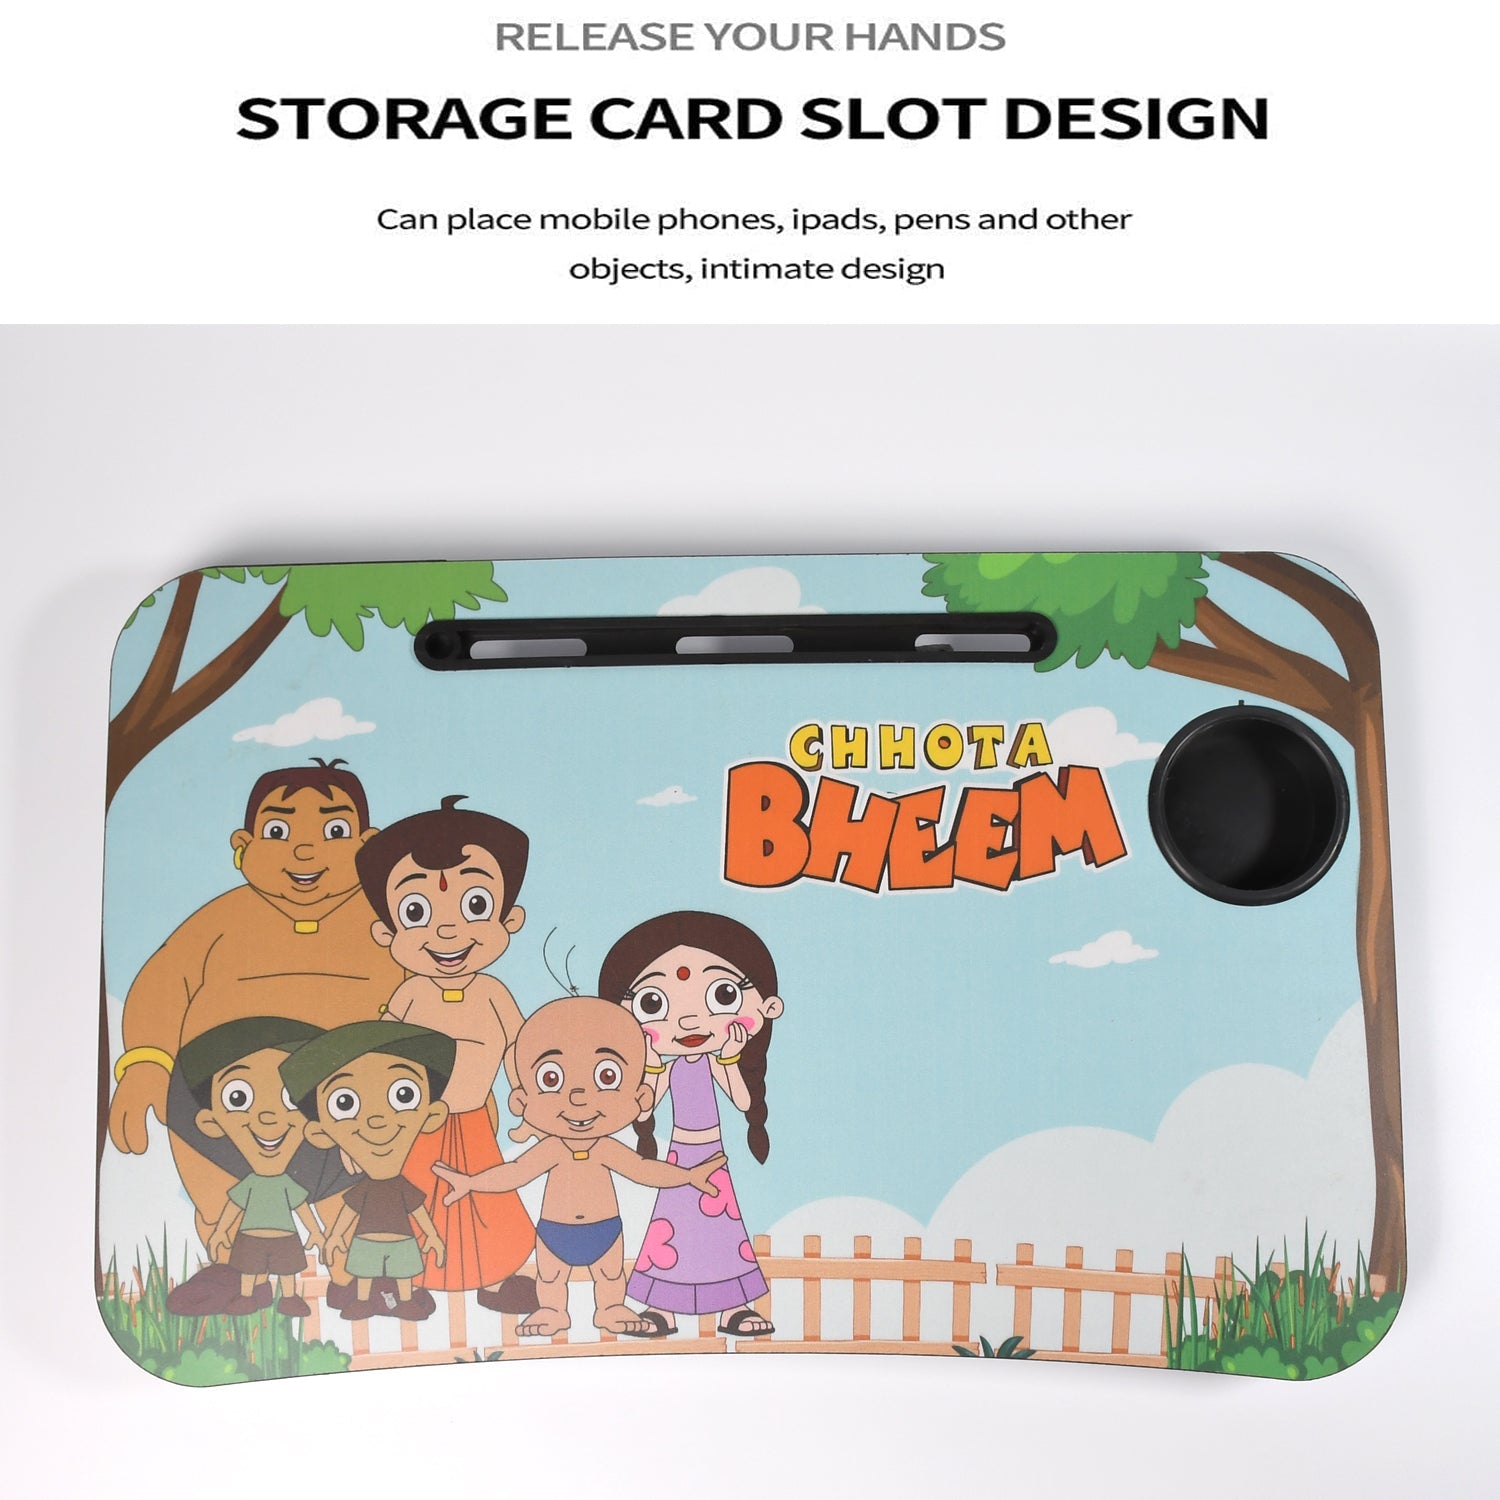 7696 Chhota Bheem Design Foldable Bed Study Table Portable Multifunction Laptop Table Lapdesk for Children Bed Foldable Table Work Office Home with Tablet Slot & Cup Holder DeoDap